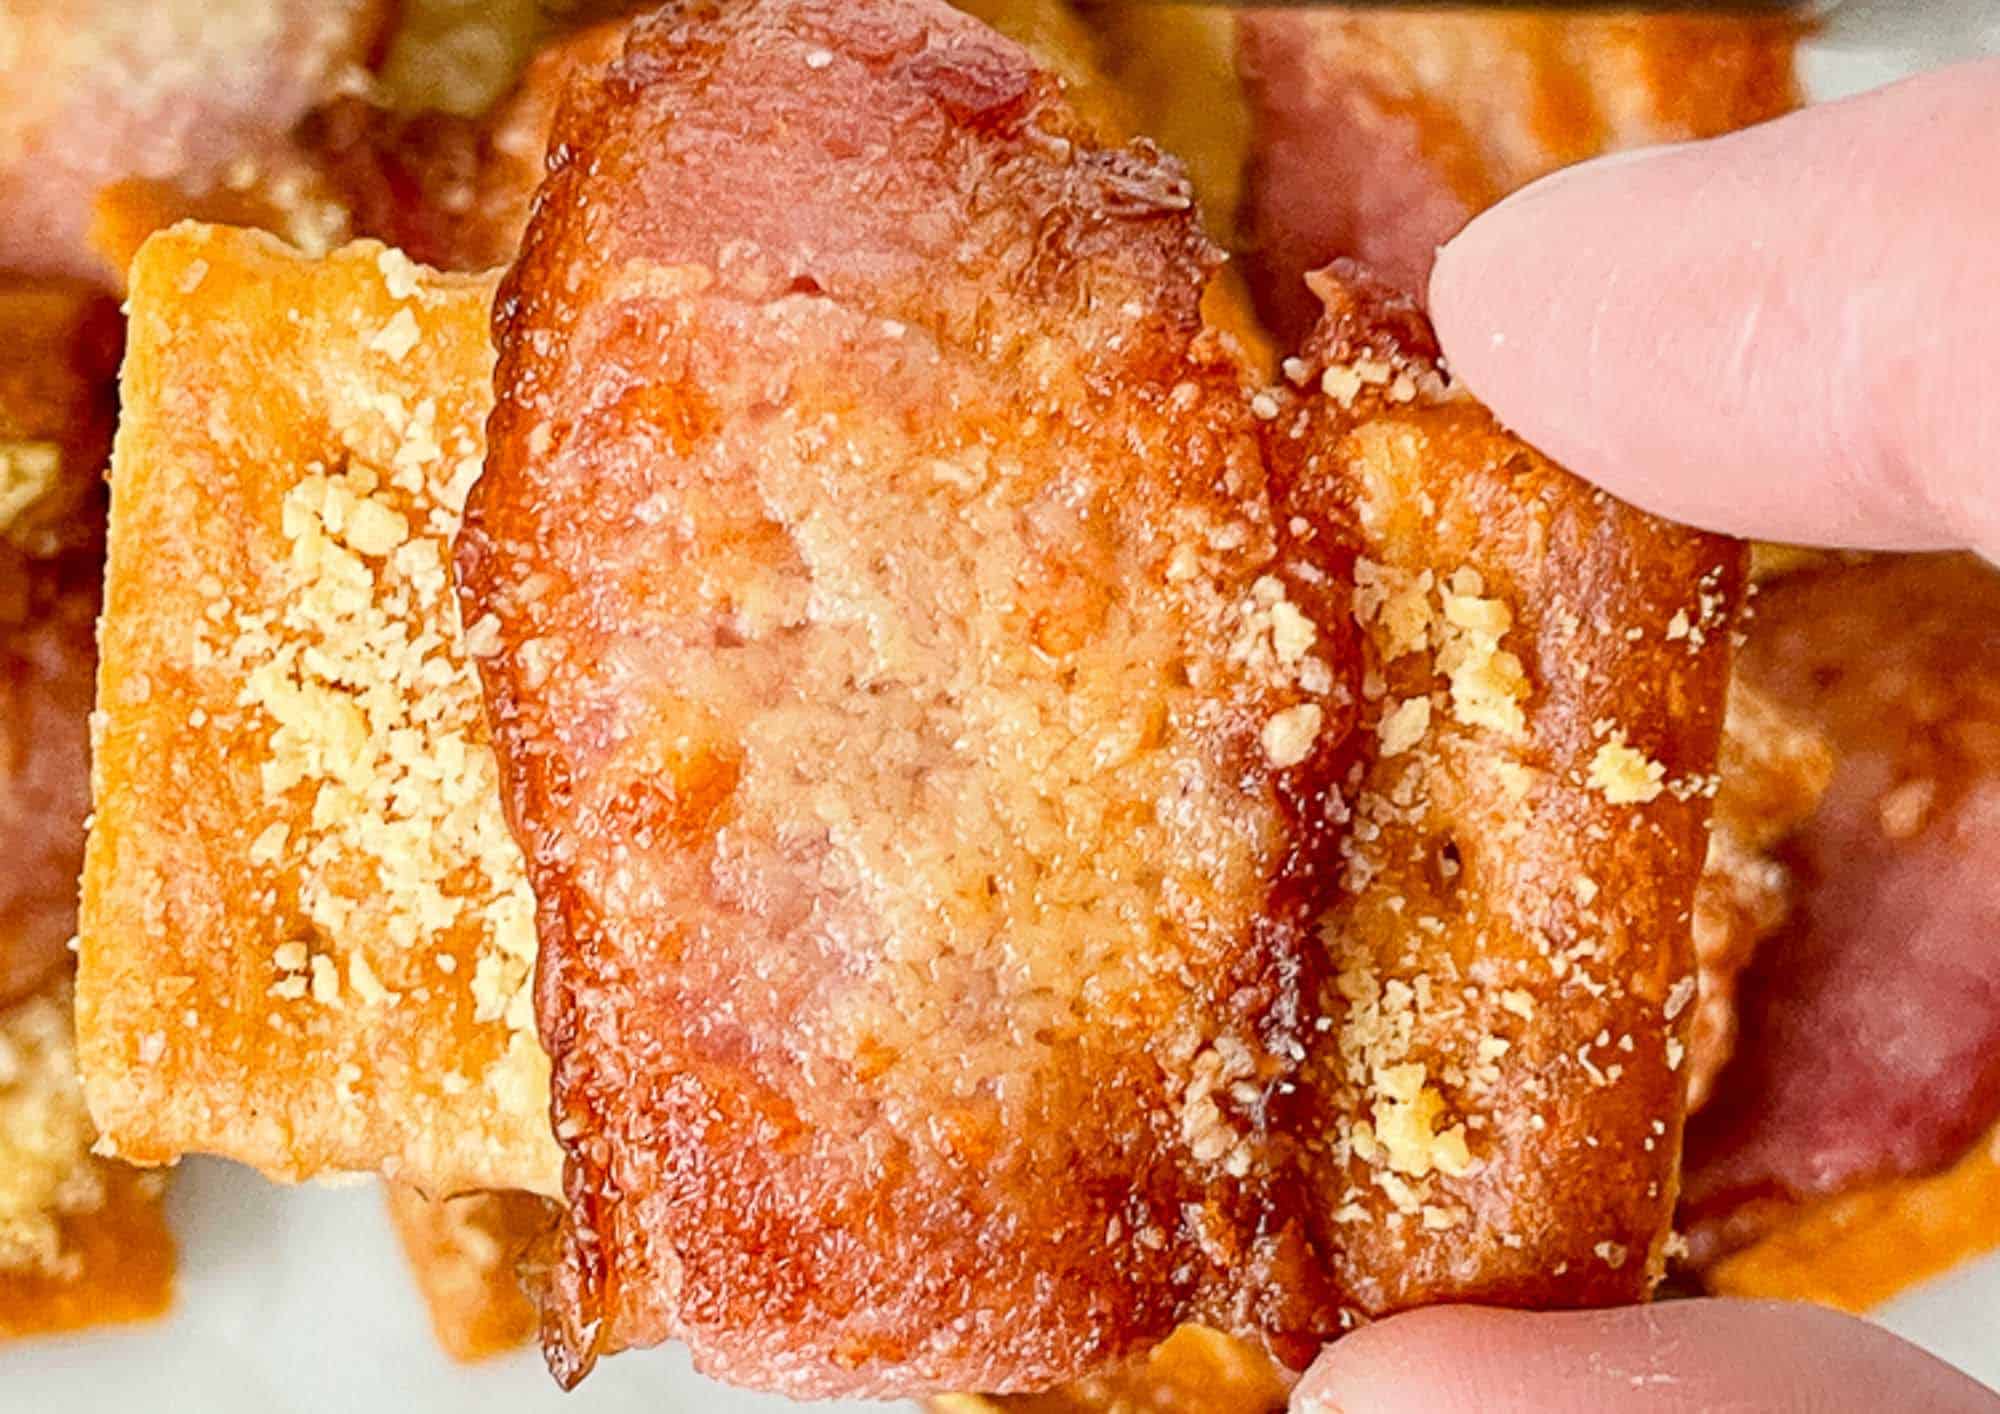 Fingers holding a bacon wrapped crackers.